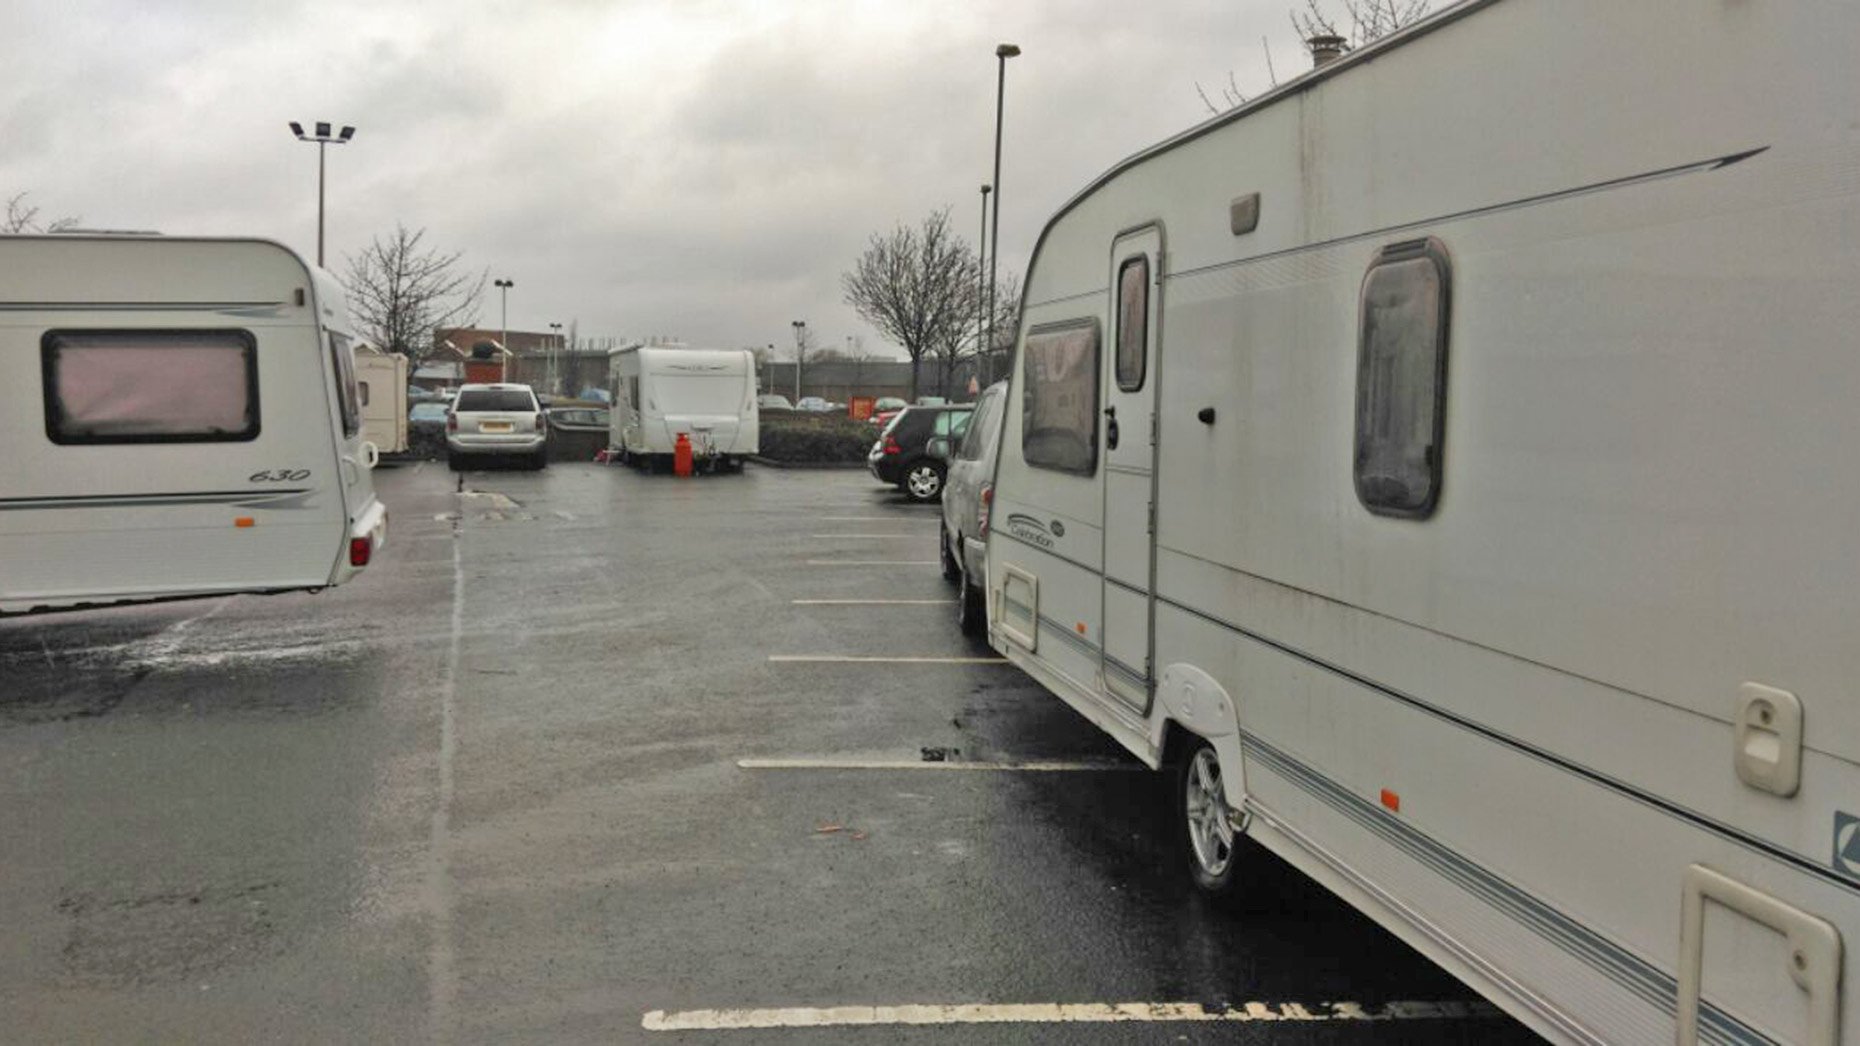 A number of caravans stayed overnight at Lincoln Morrisons